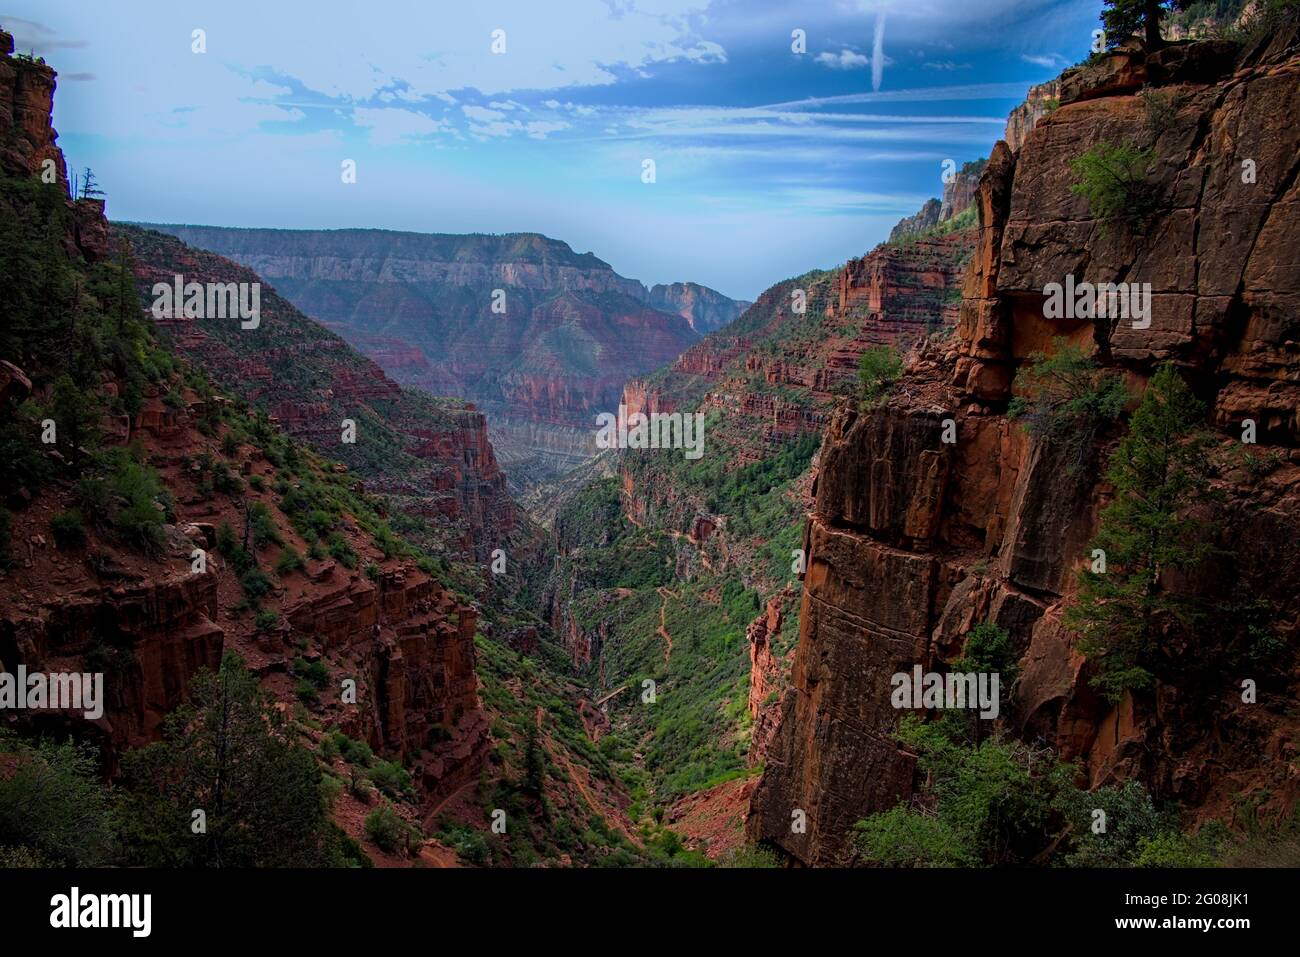 View from North rim grand canyon north kaibab trail descending switchbacks down steep terrain to reach phantom ranch at bottom. Stock Photo